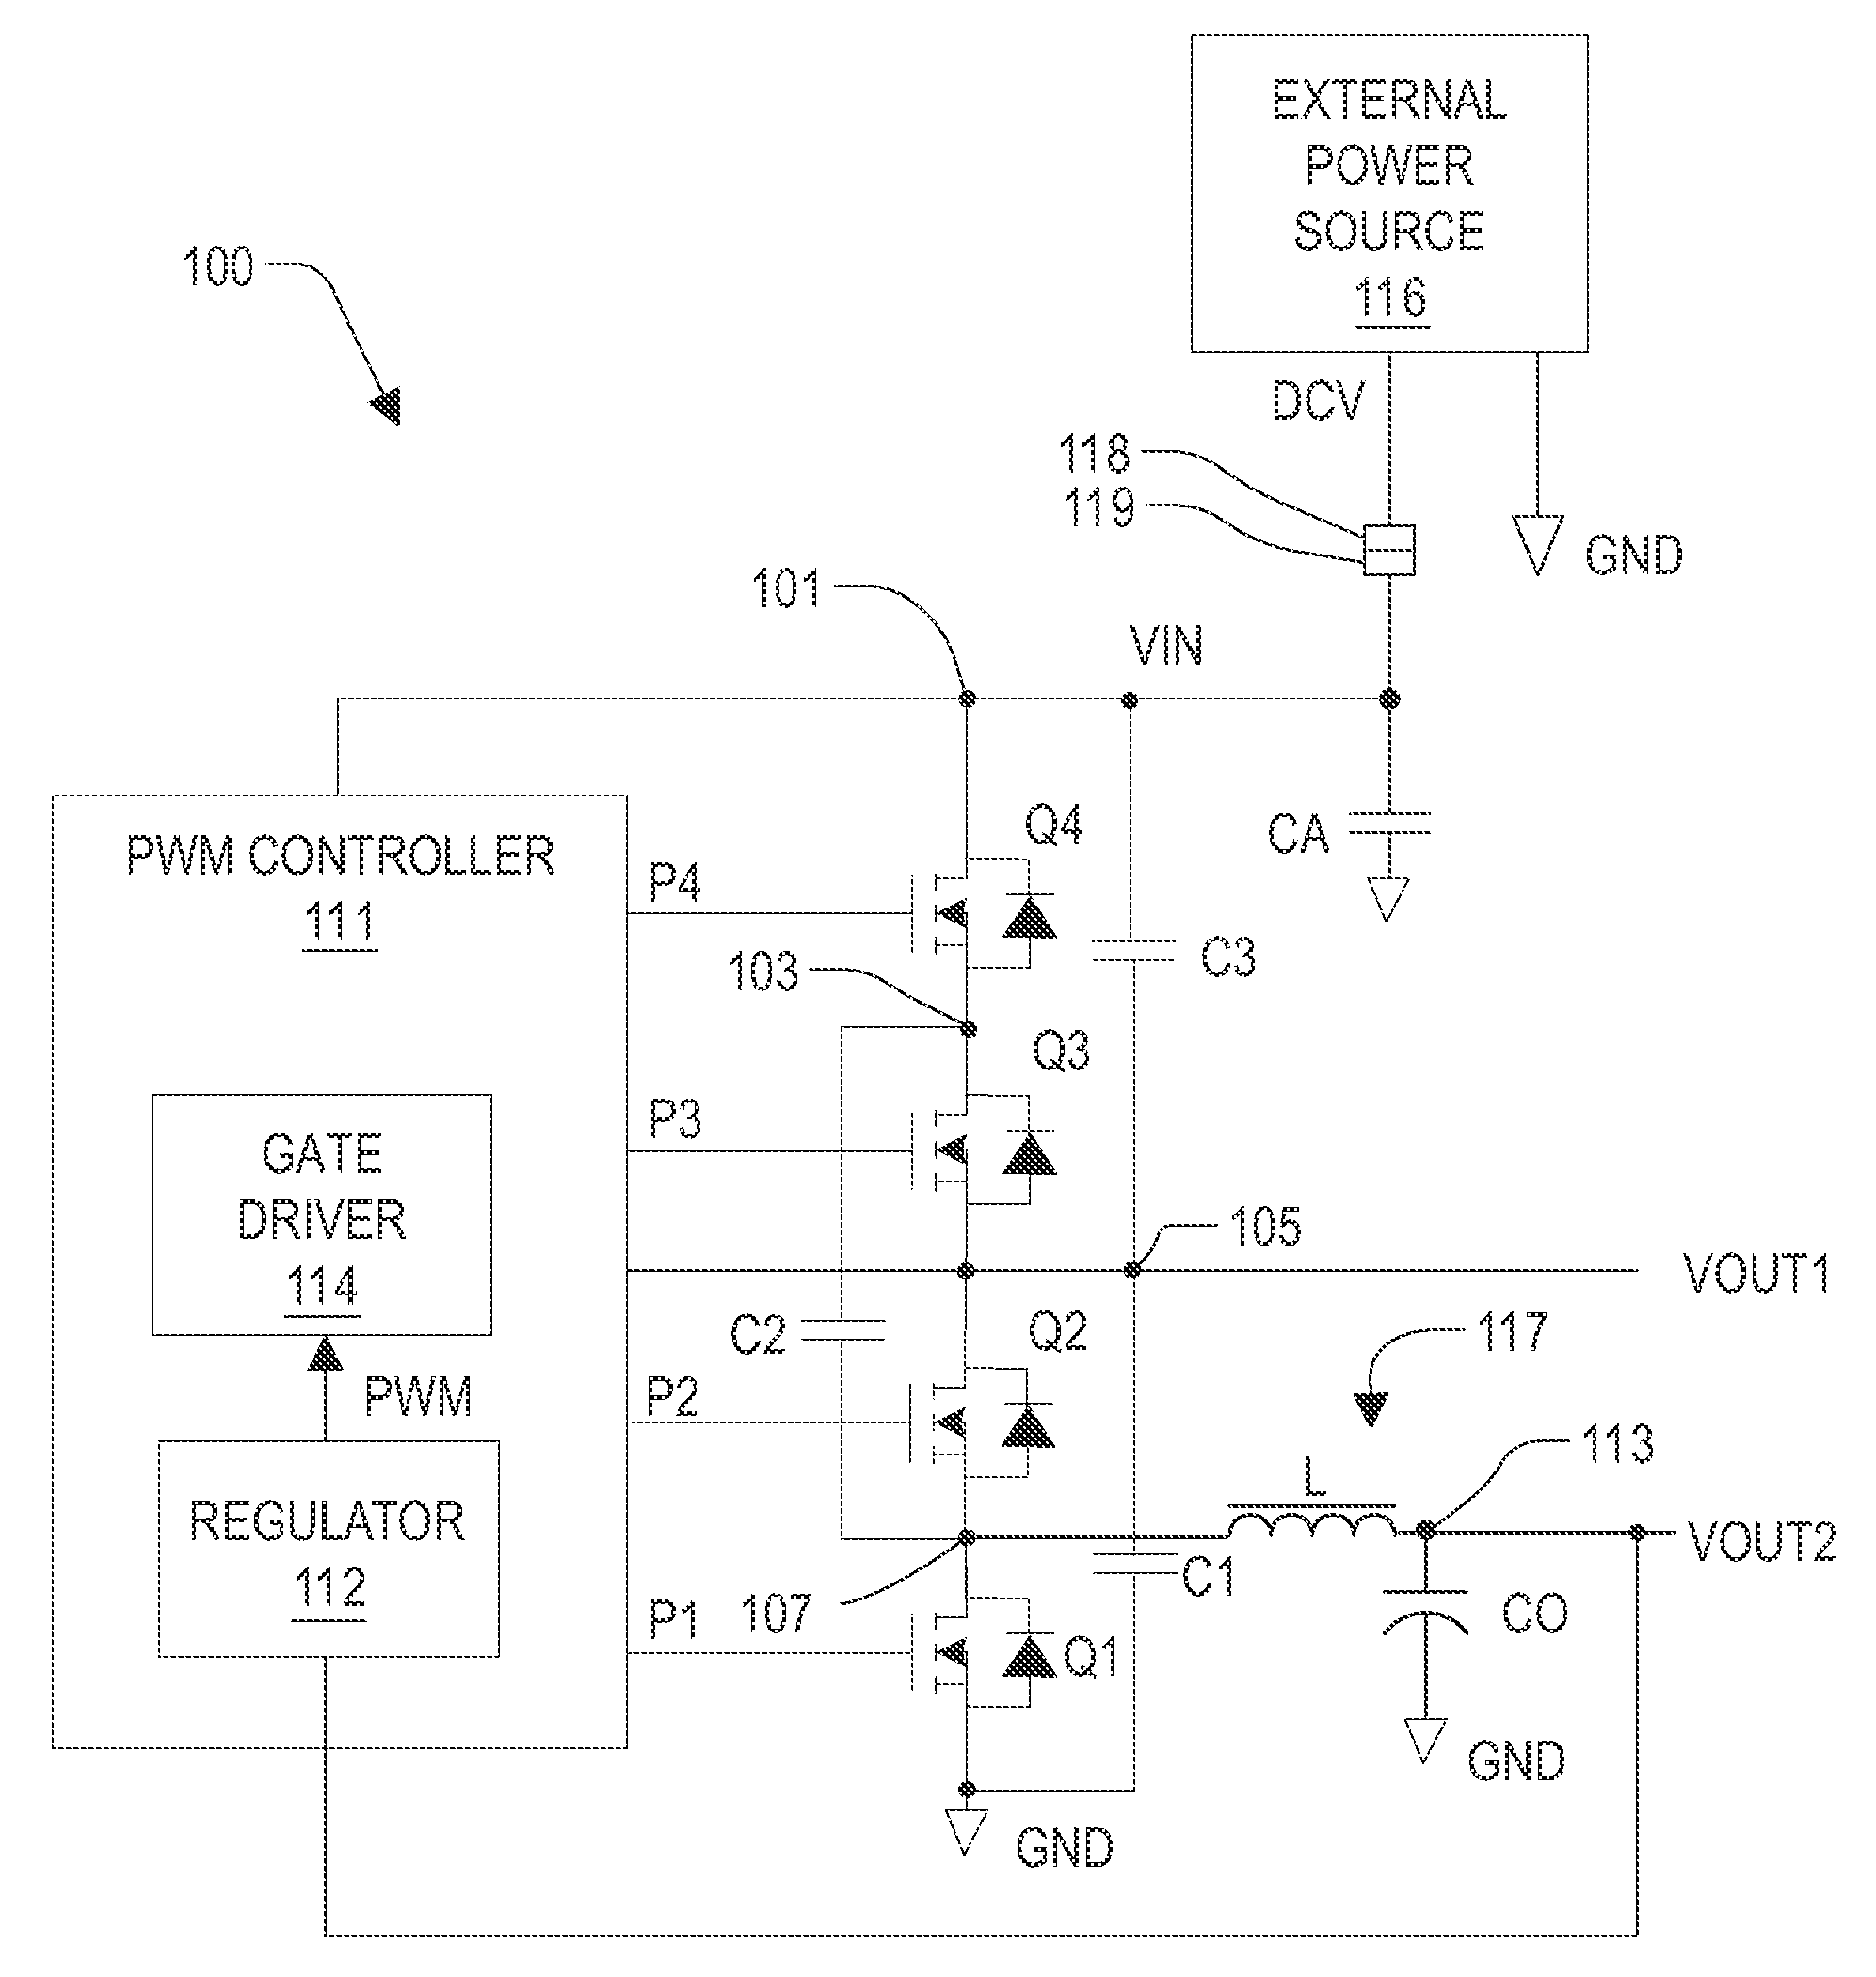 Voltage converter with combined buck converter and capacitive voltage divider